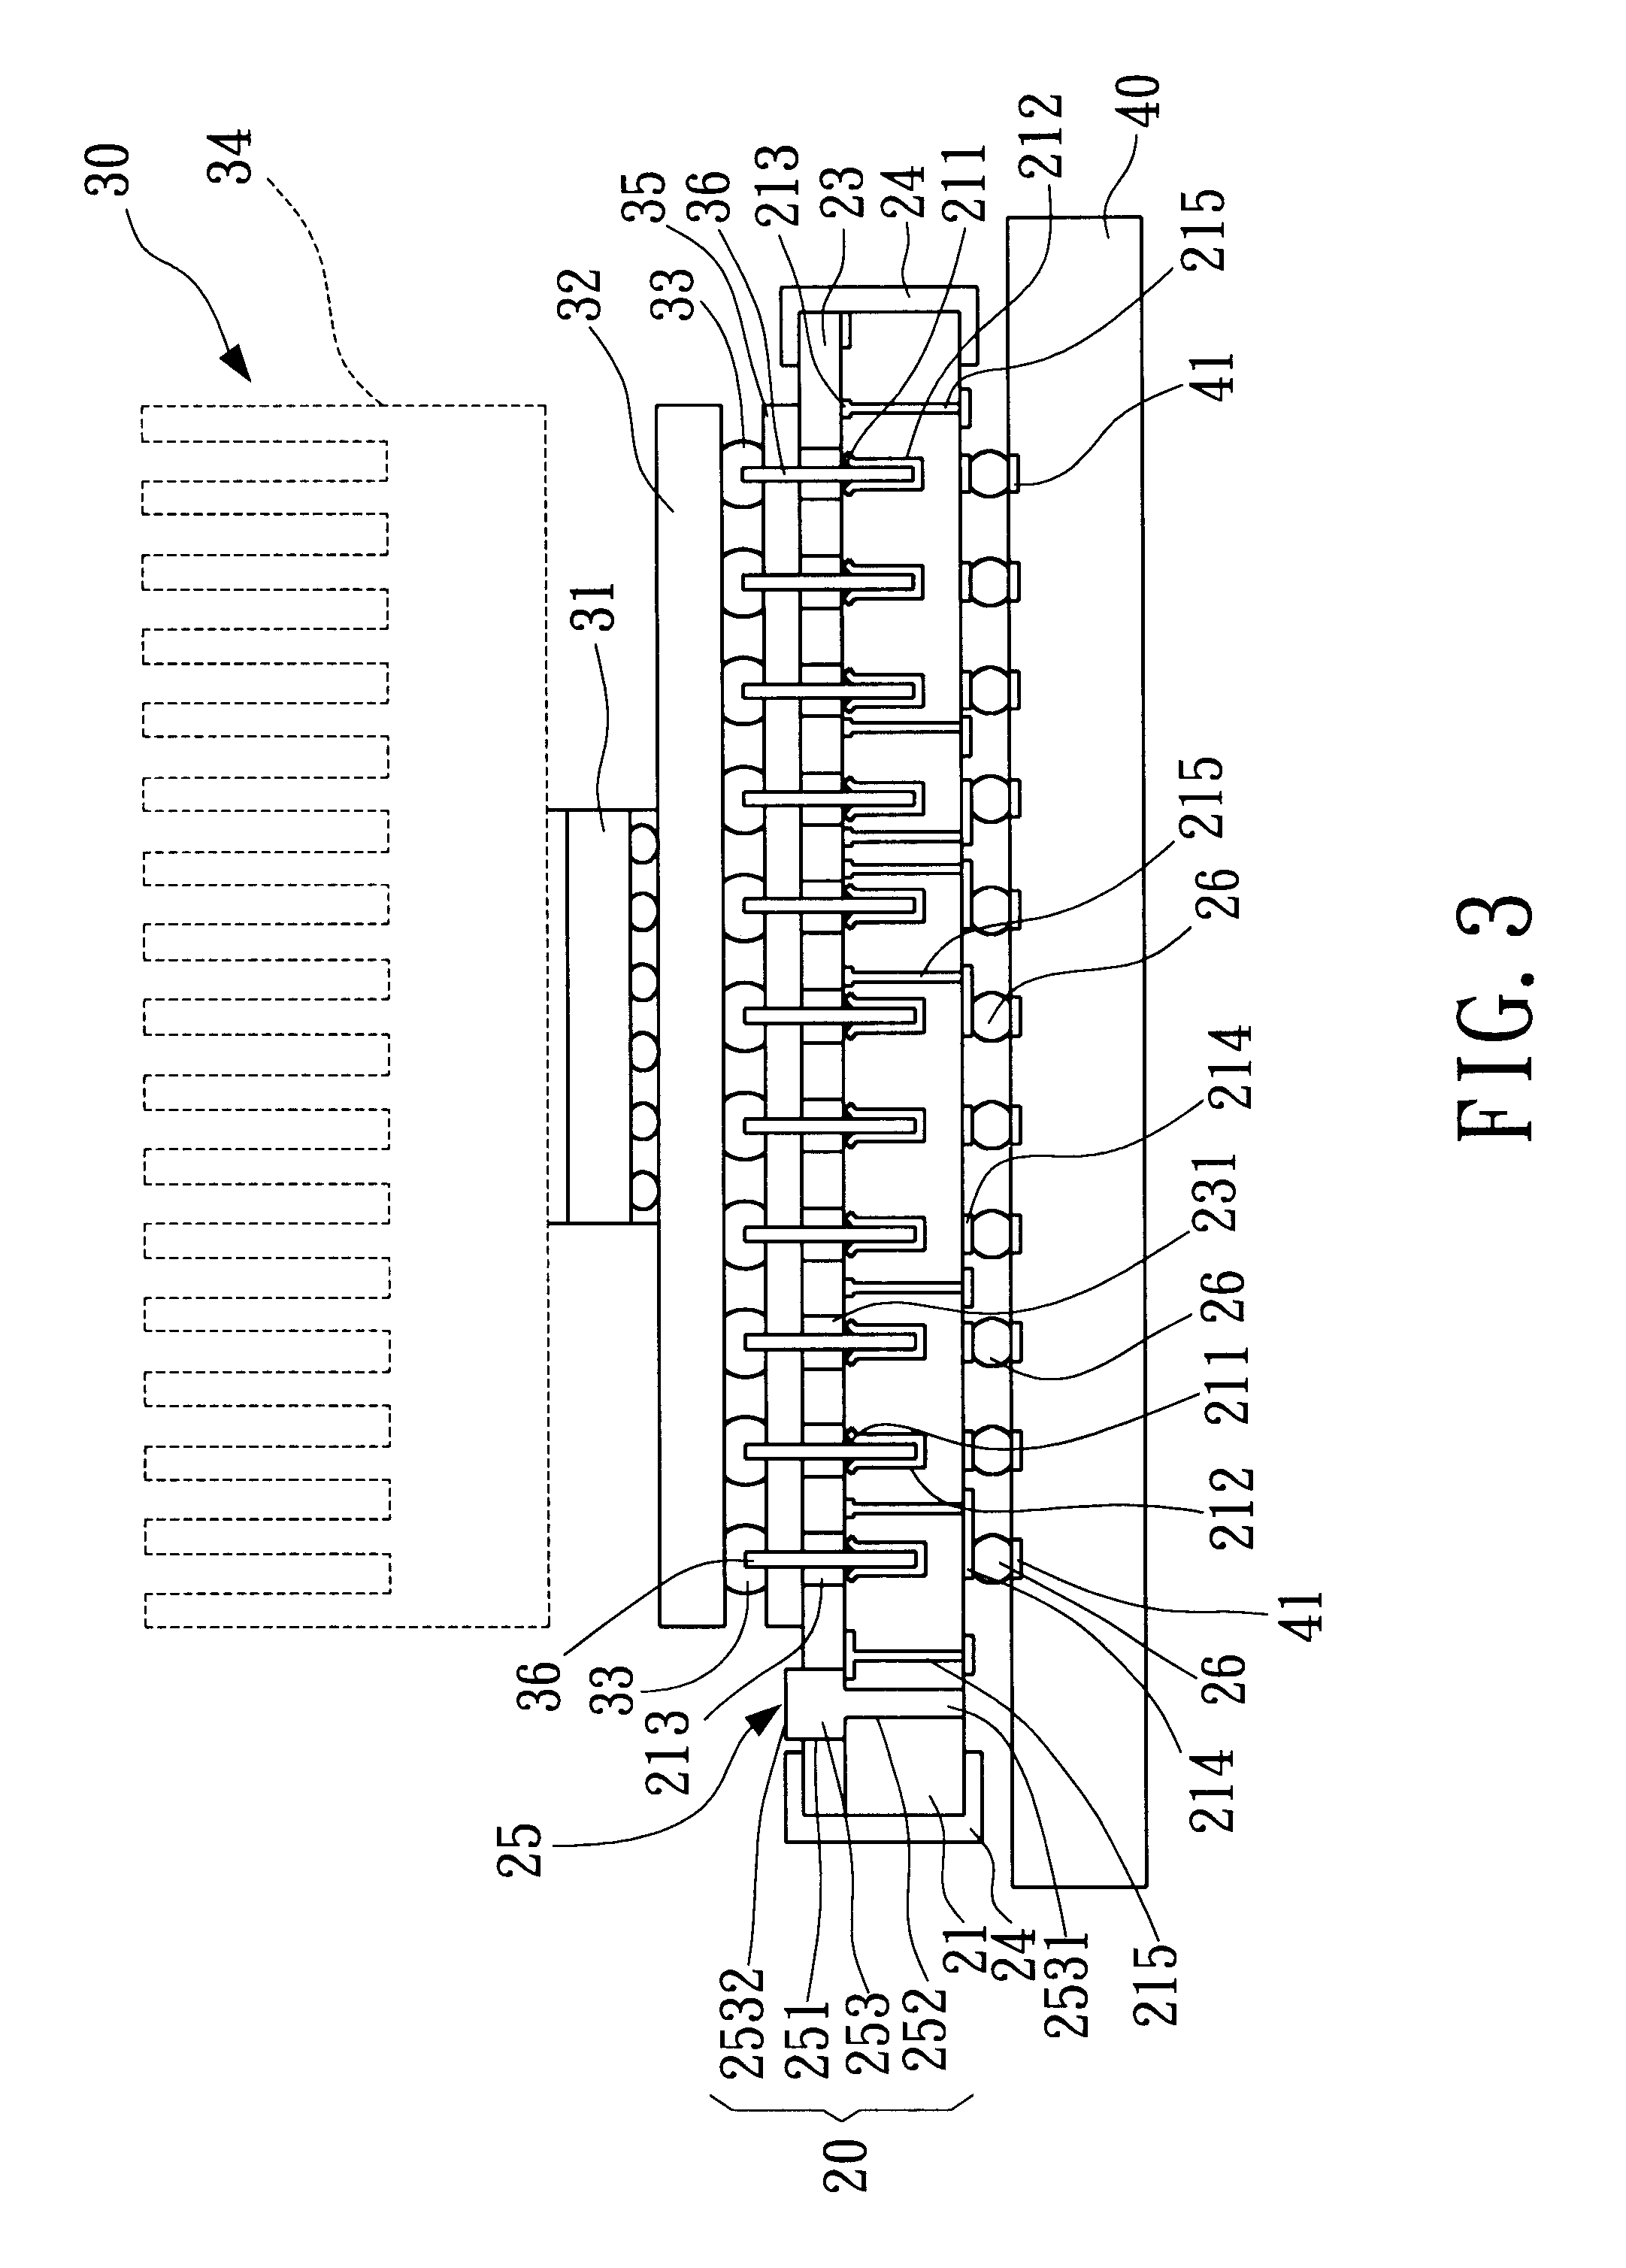 Pin grid array integrated circuit connecting device